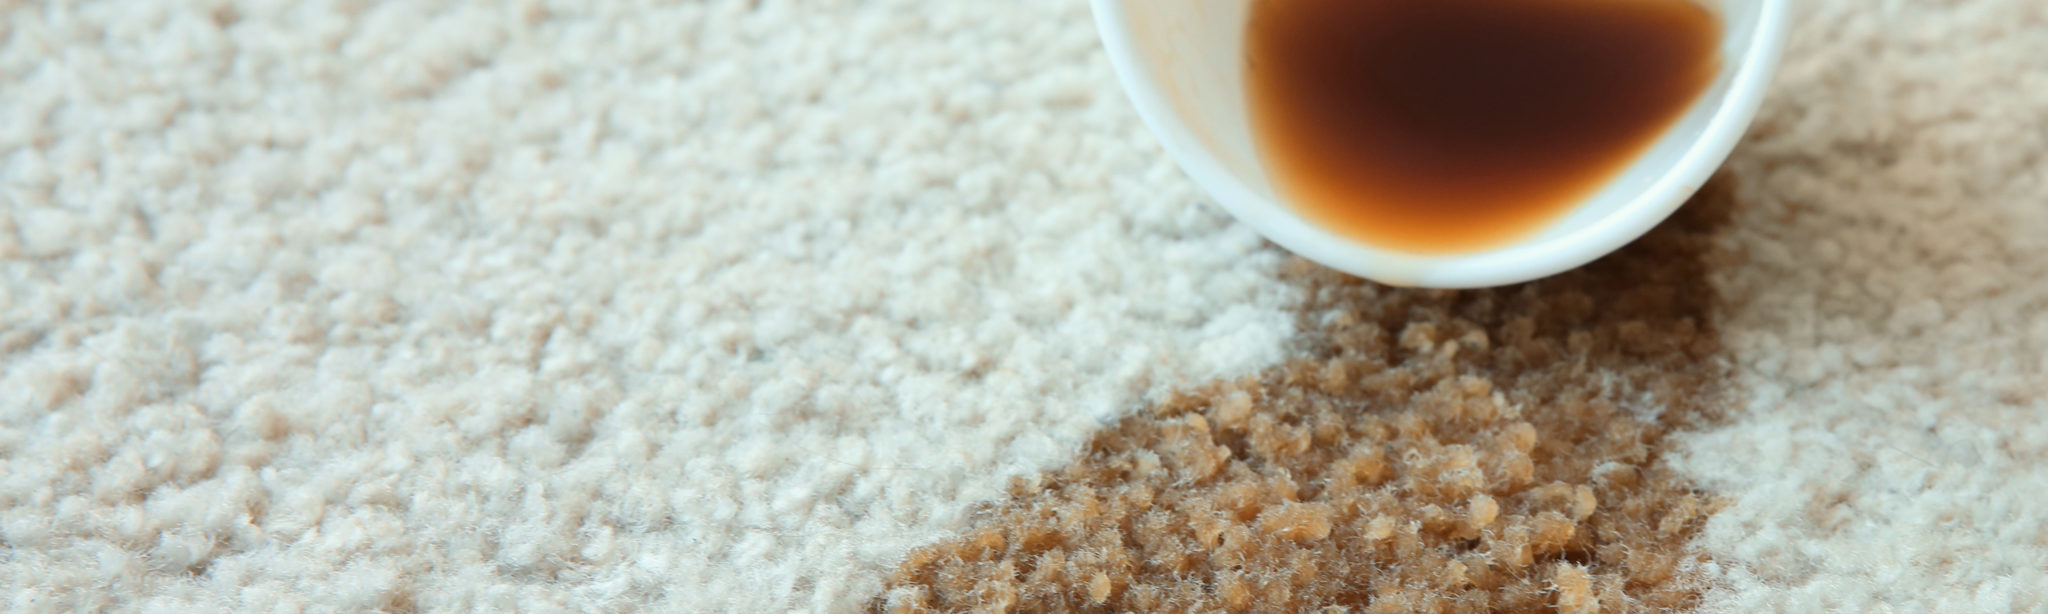 cup of coffee spilled on carpet